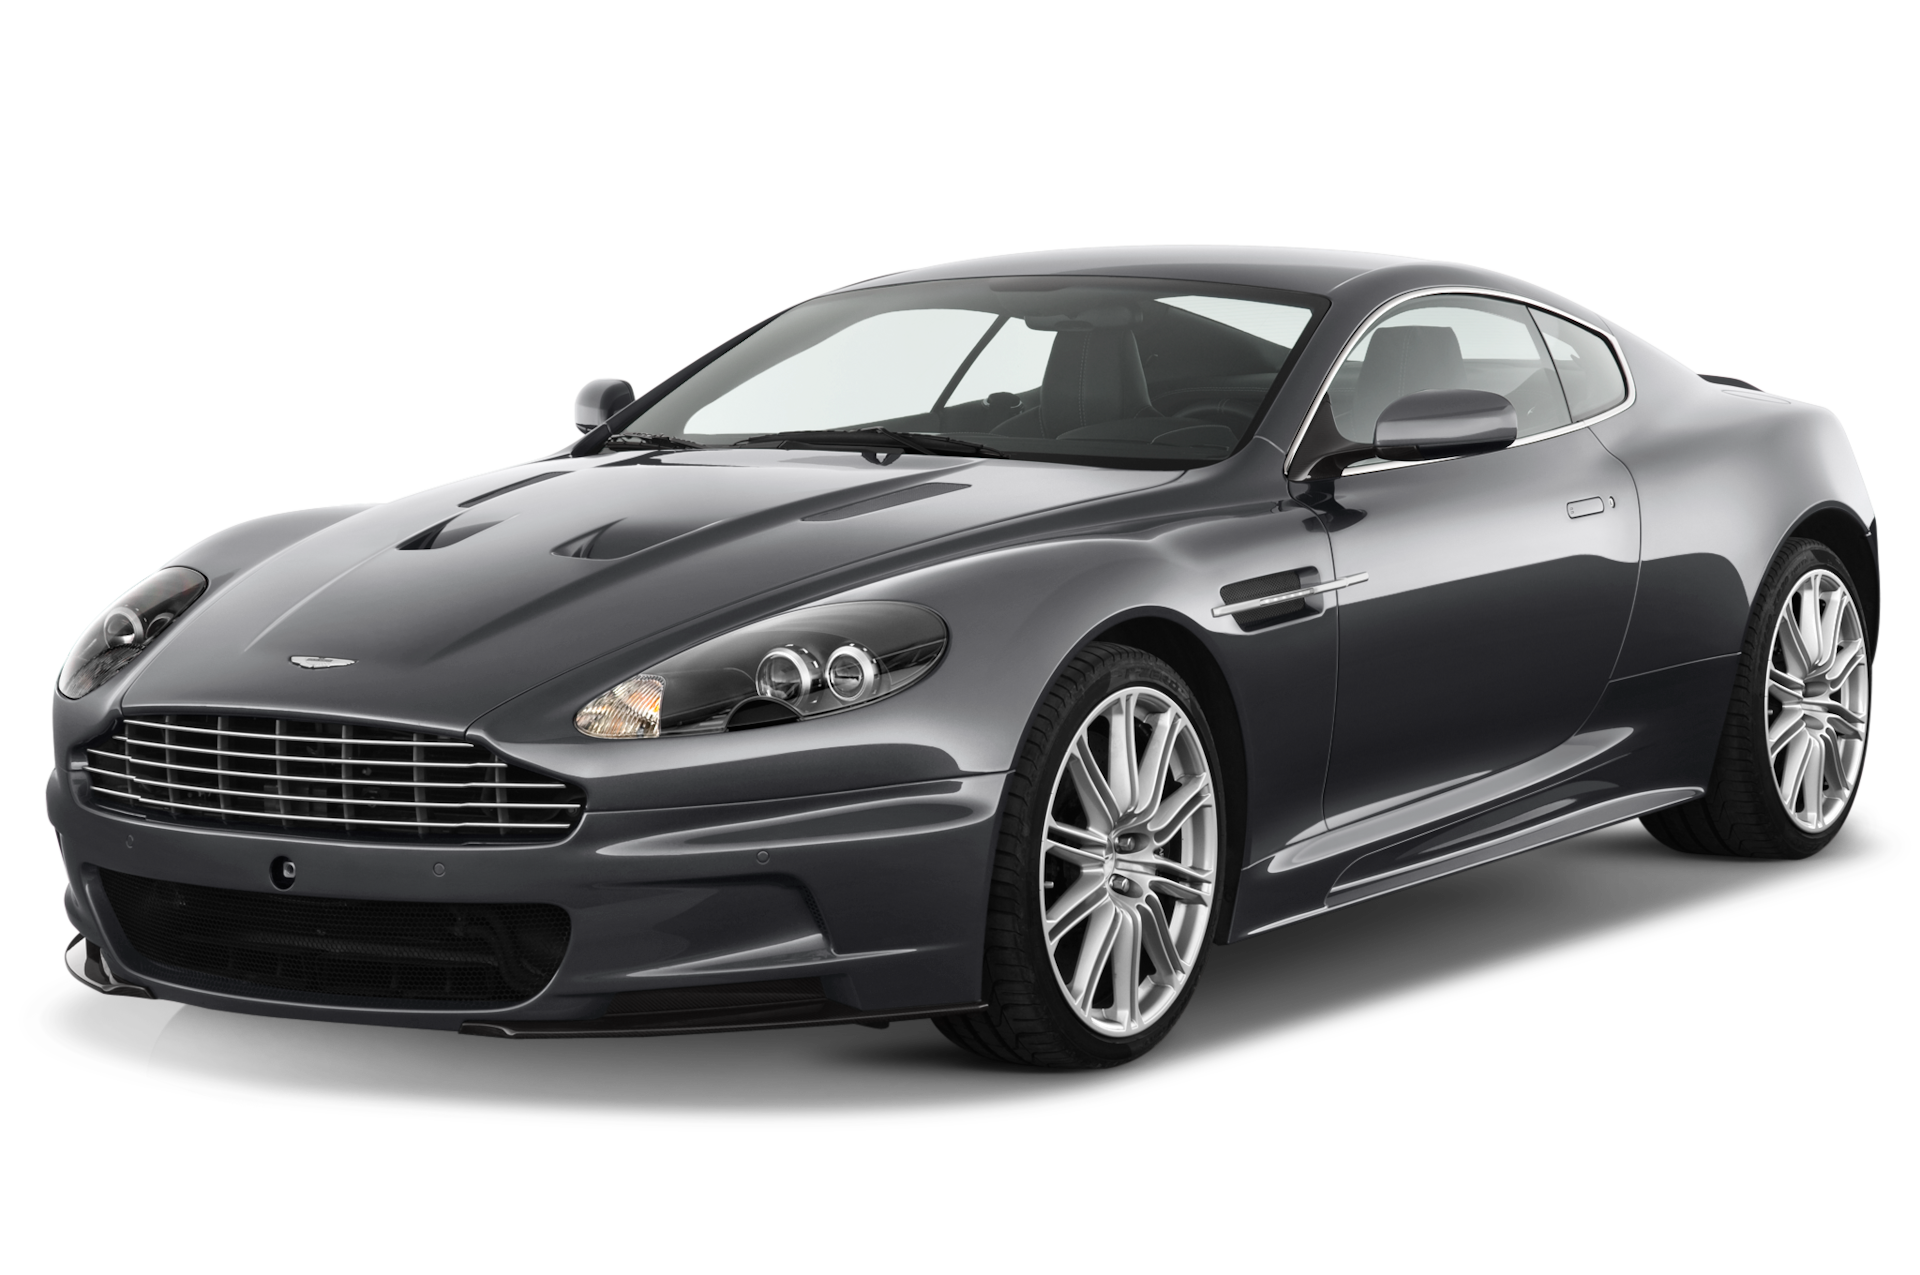 2012 Aston Martin DBS Prices, Reviews, and Photos - MotorTrend